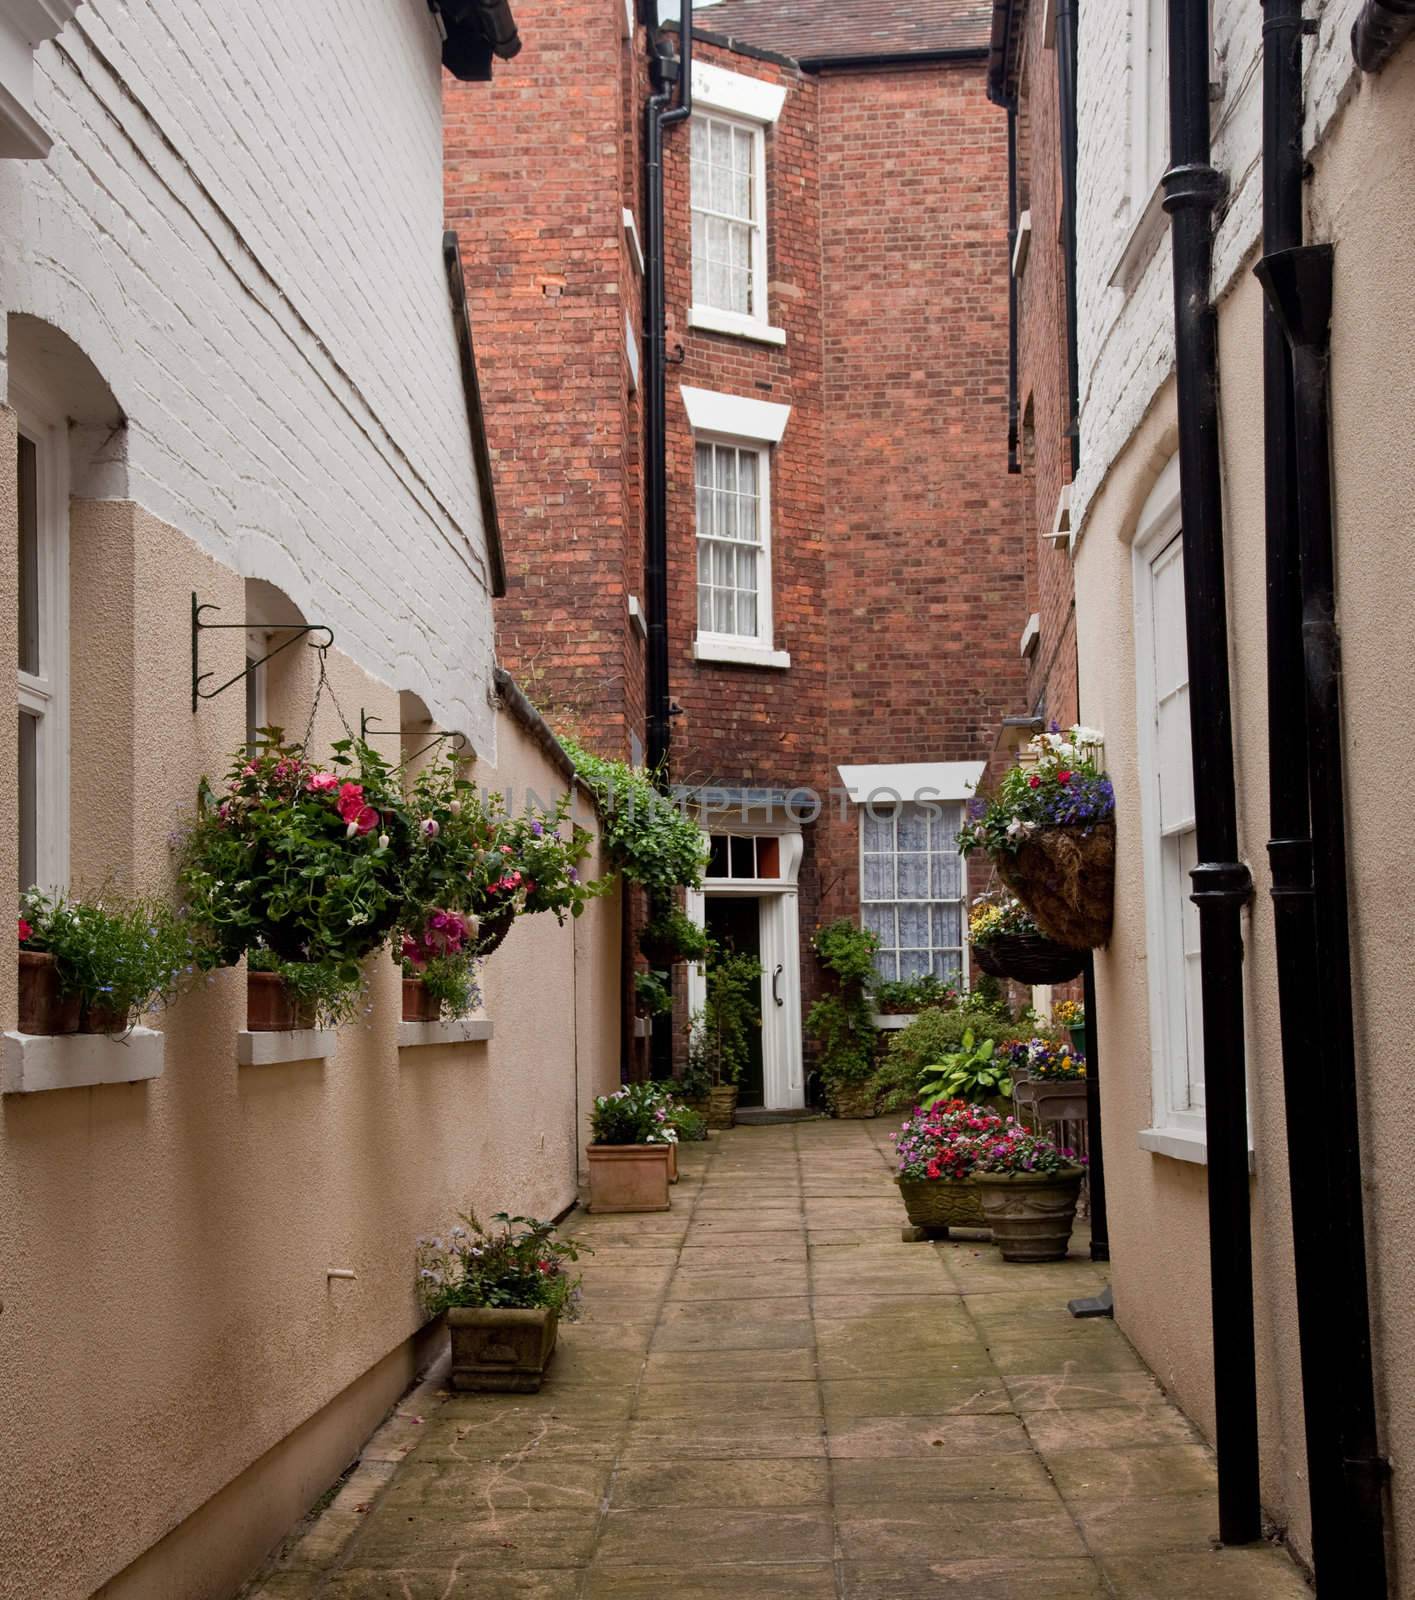 Narrow alley leading to red brick house by steheap